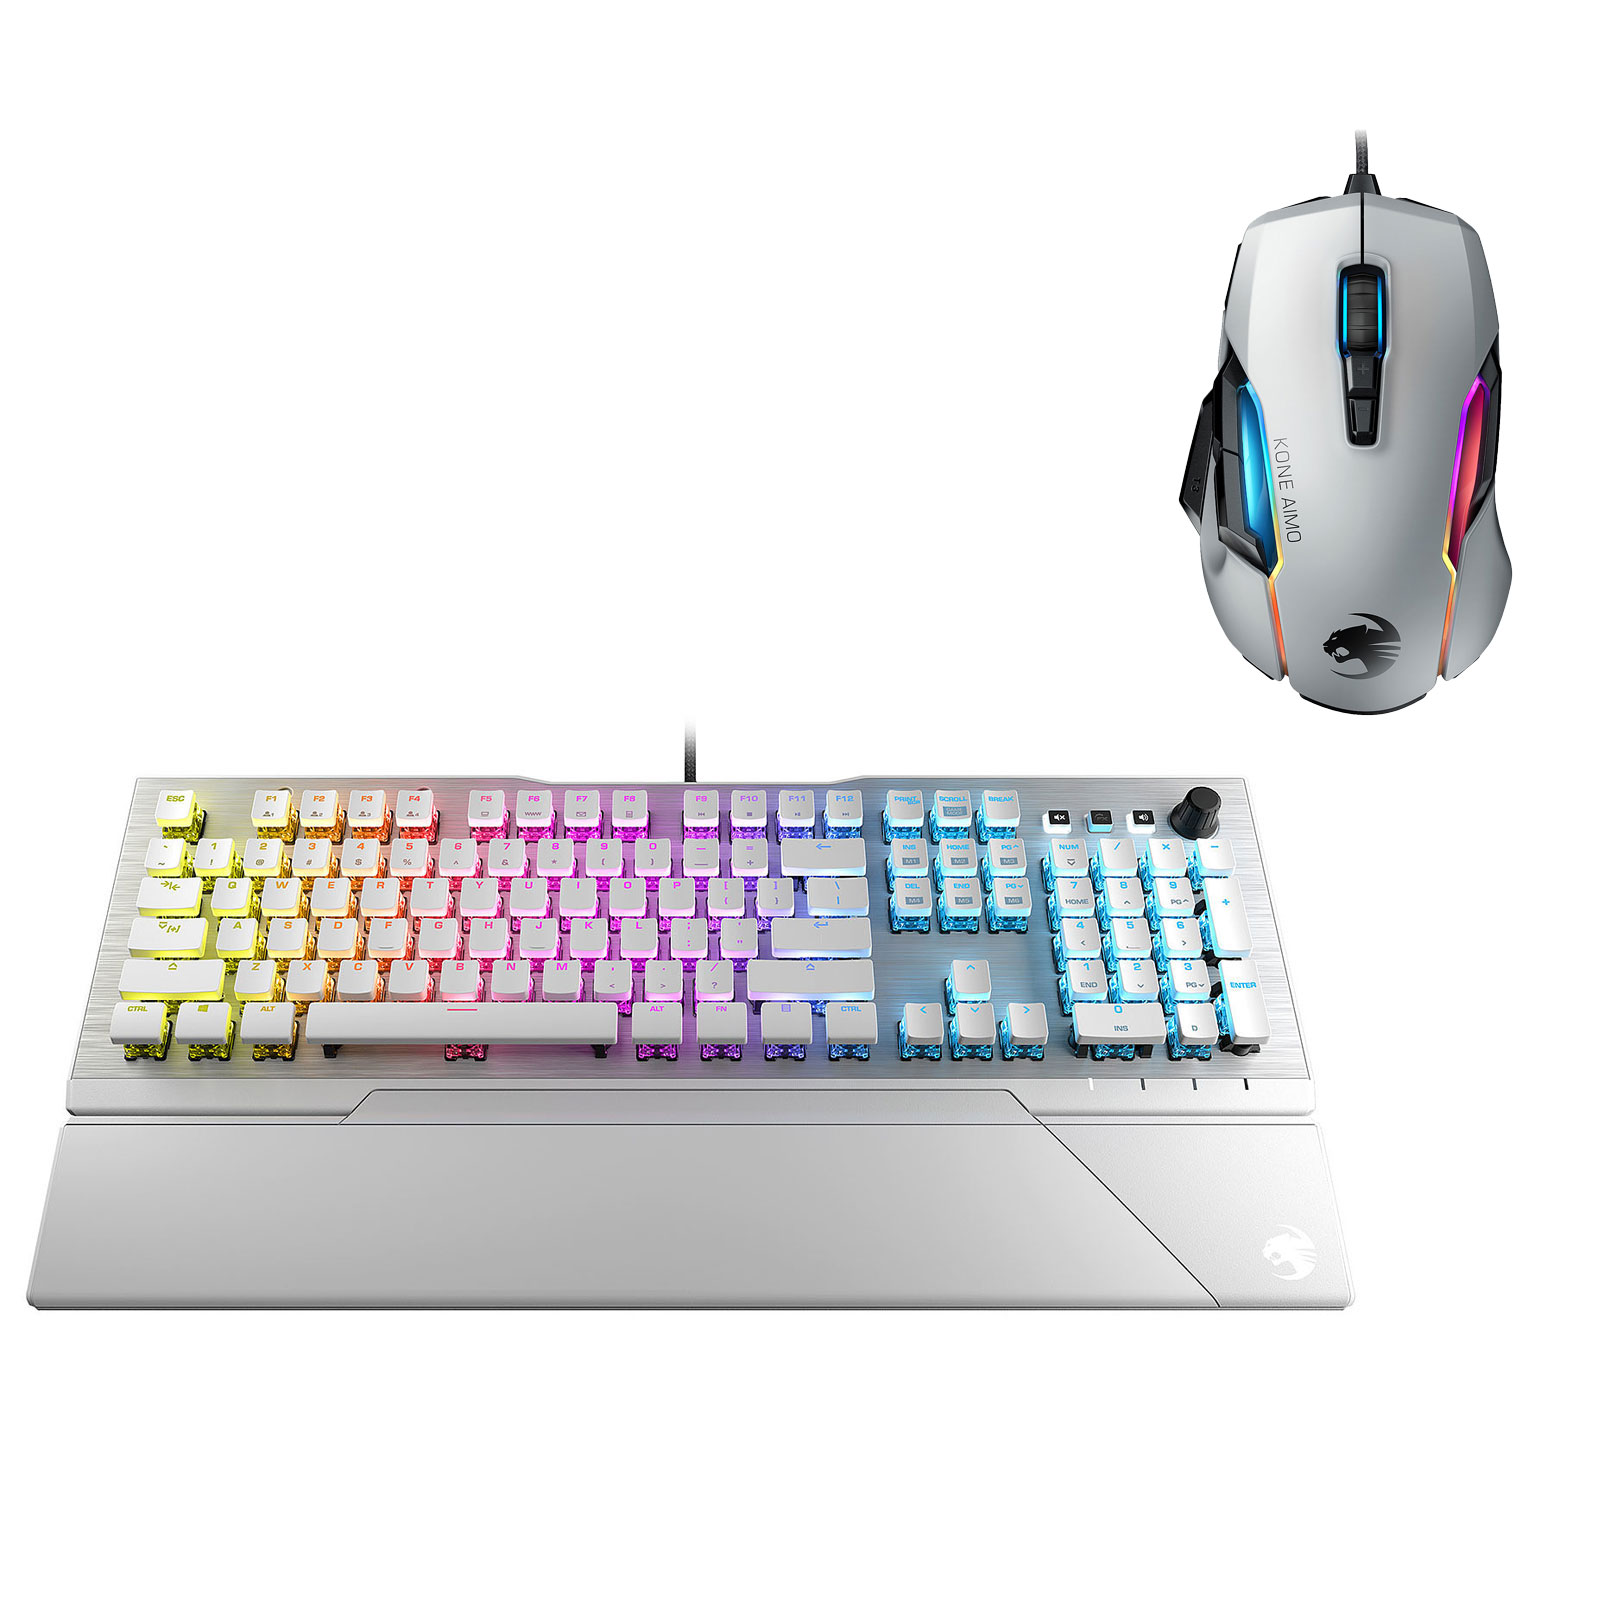 Roccat Vulcan 122 Aimo Kone Aimo Remastered Pas Cher Hardware Fr